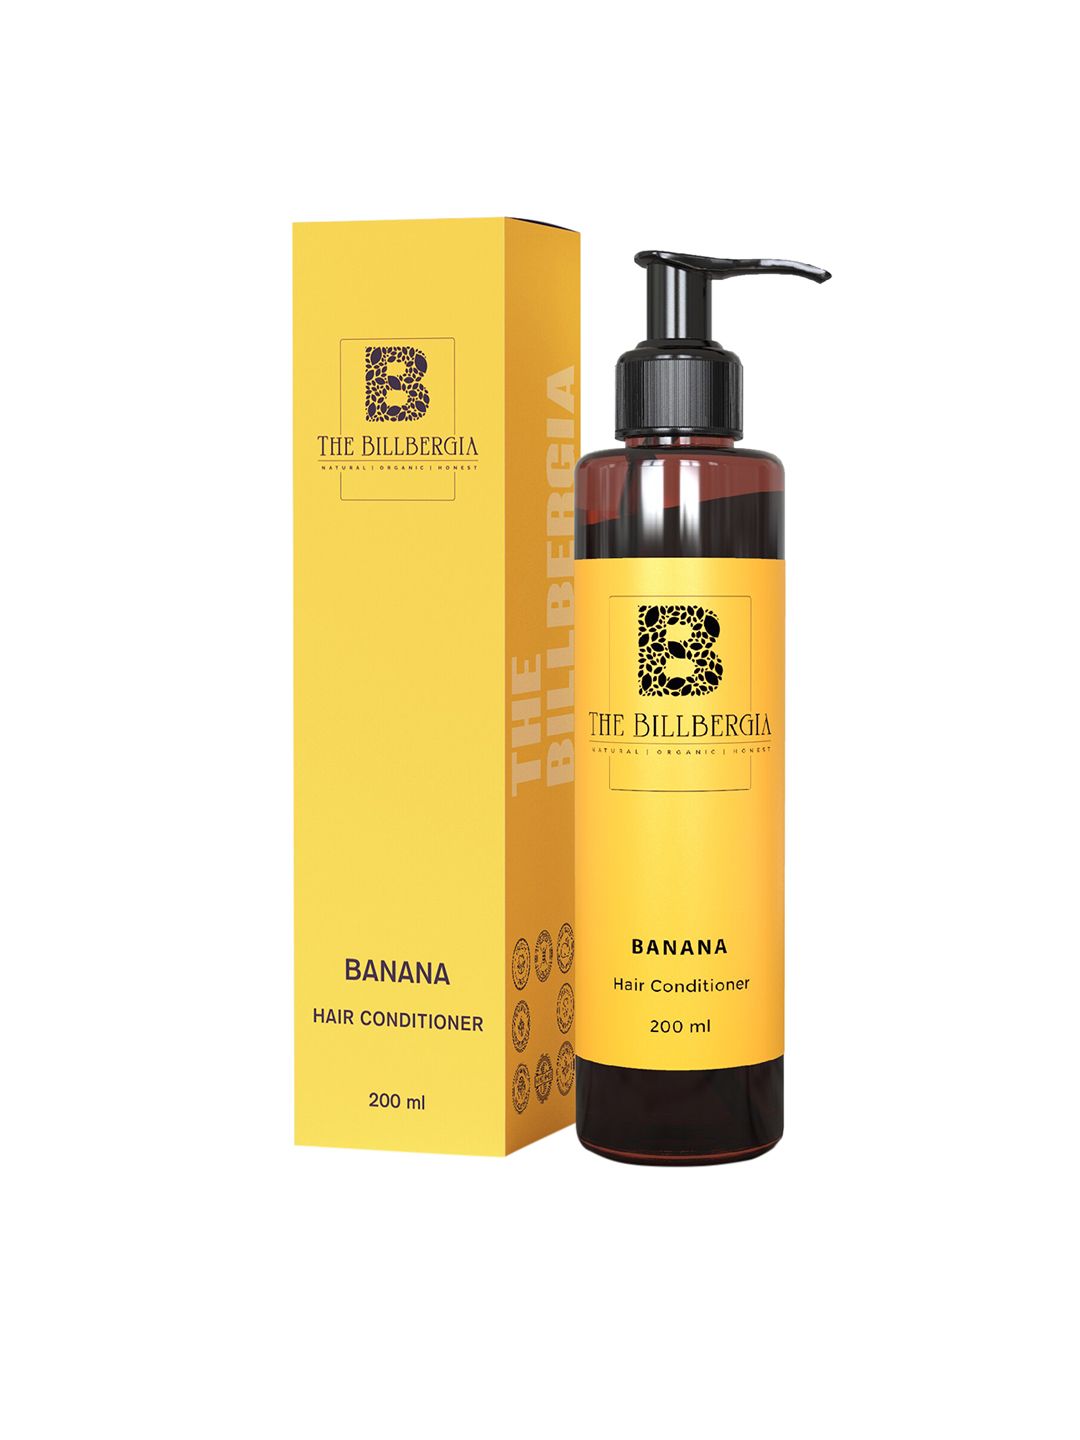 THE BILLBERGIA Banana Hair Conditioner with Shea Butter 200 ml Price in India